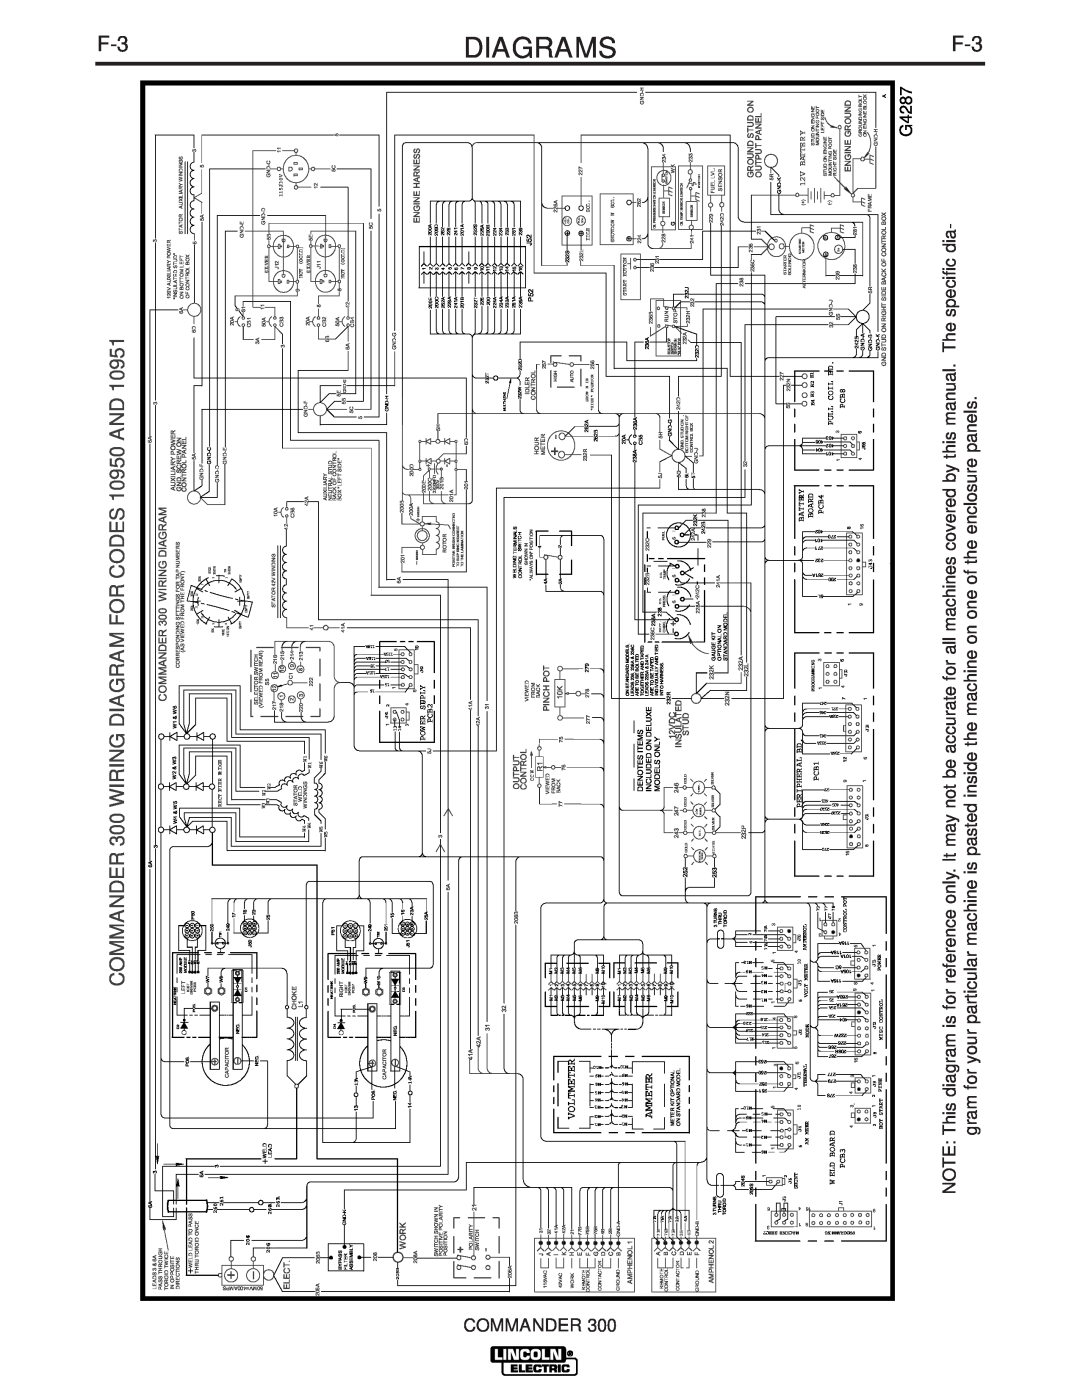 Lincoln Electric IM700-D COMMANDER 300 WIRING DIAGRAM FOR CODES 10950 AND, Commander, Voltmeter, Ammeter, PCB2, Board 